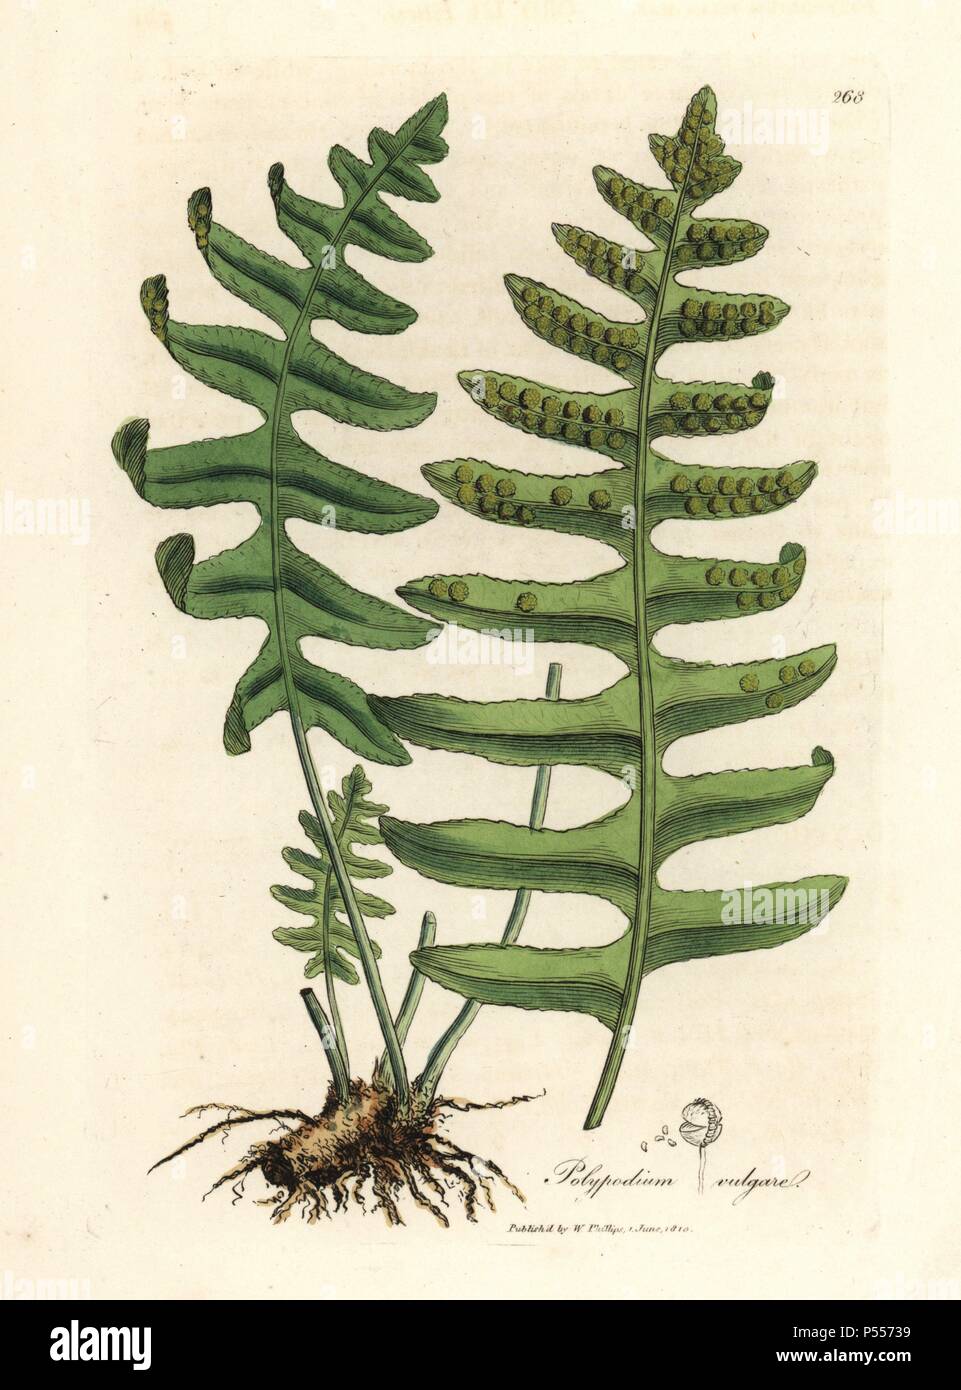 Common polypody, Polypodium vulgare. Handcoloured copperplate engraving from a botanical illustration by James Sowerby from William Woodville and Sir William Jackson Hooker's 'Medical Botany,' John Bohn, London, 1832. The tireless Sowerby (1757-1822) drew over 2, 500 plants for Smith's mammoth 'English Botany' (1790-1814) and 440 mushrooms for 'Coloured Figures of English Fungi ' (1797) among many other works. Stock Photo